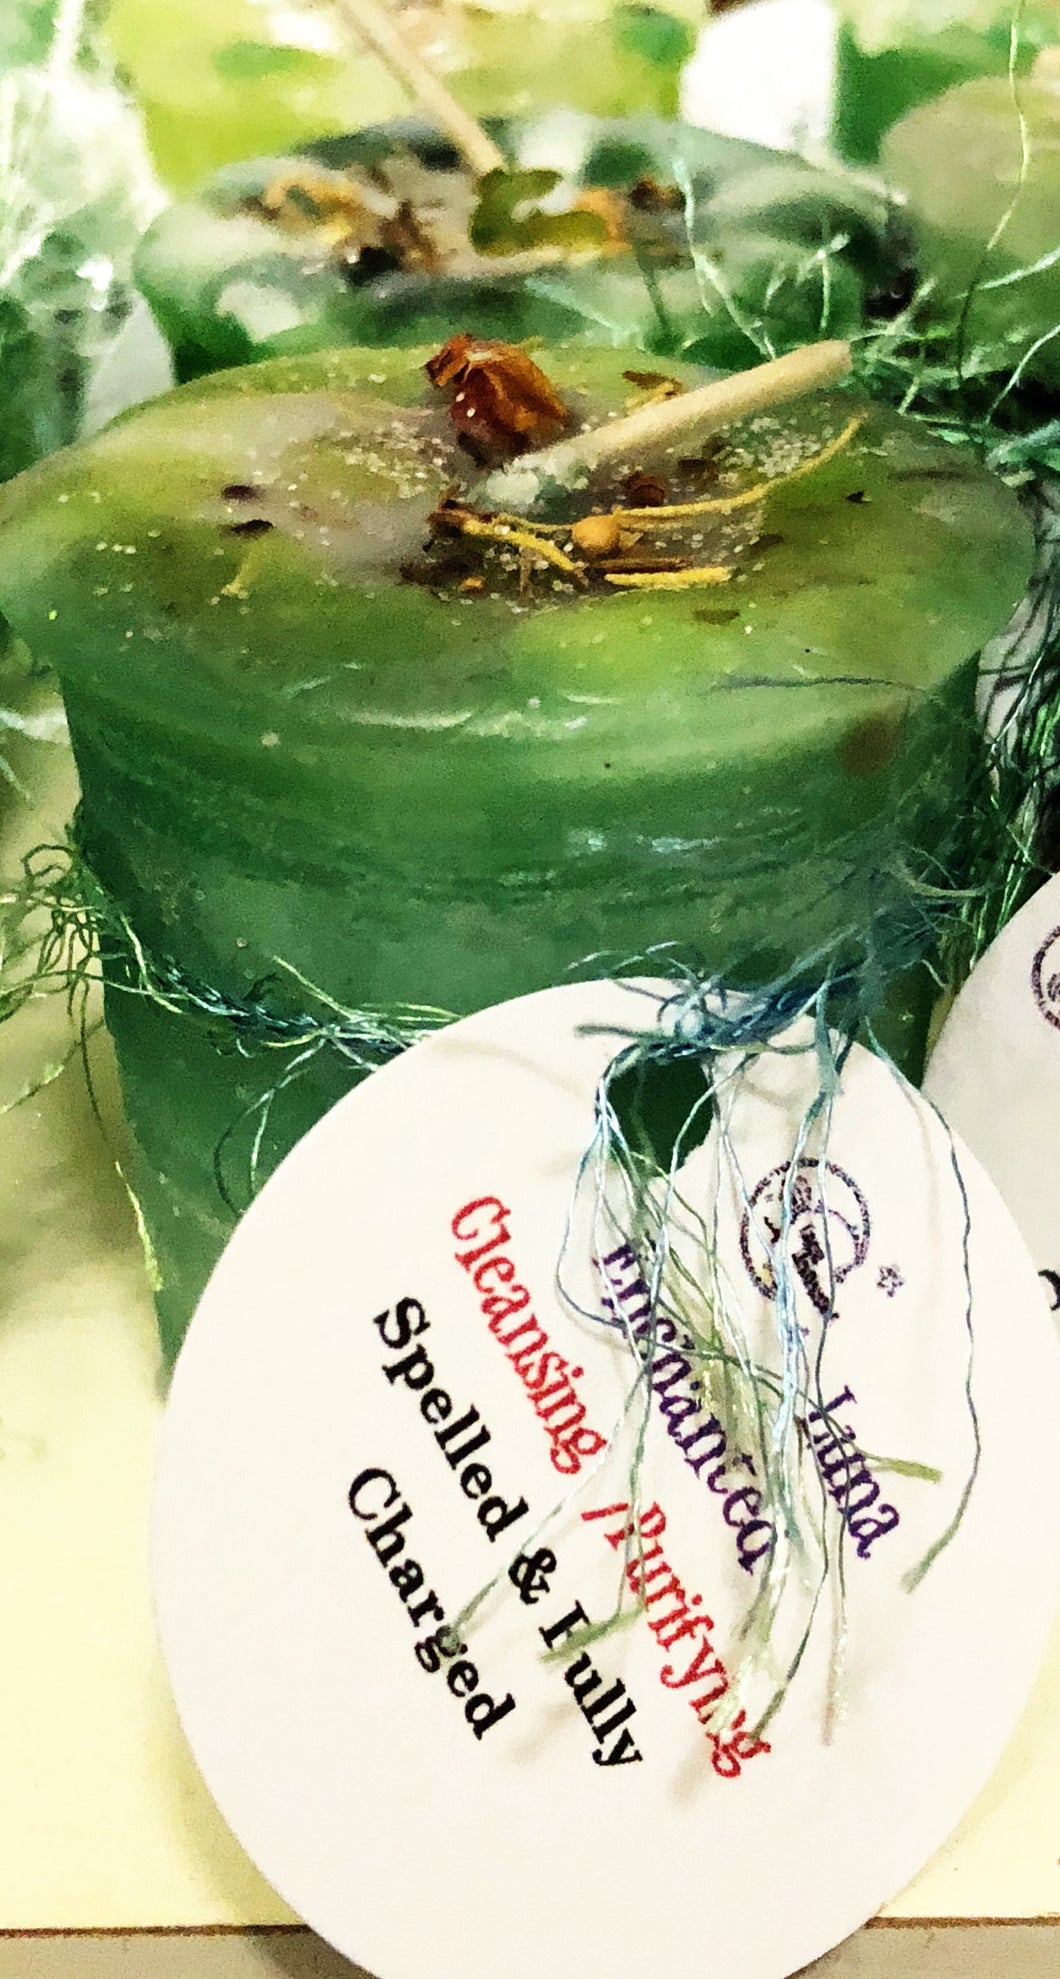 Cleansing & Purifying Votive Spell Candle